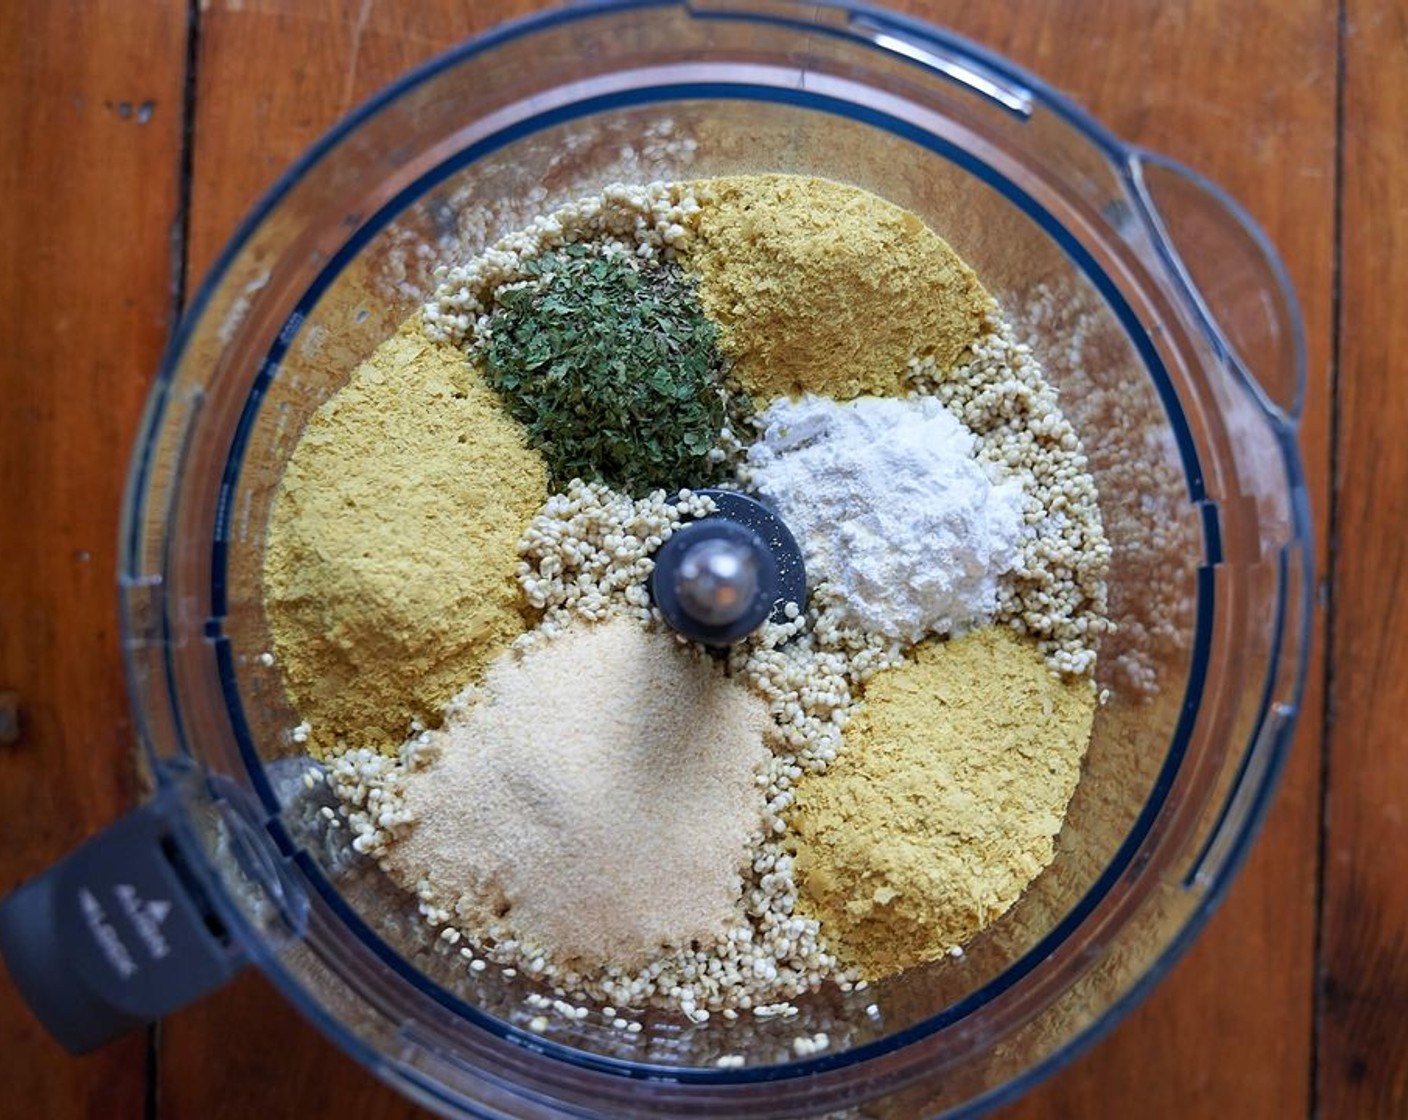 step 3 Add the quinoa, Water (1 cup), the Baking Powder (1 Tbsp), McCormick® Garlic Powder (2 Tbsp), Italian Seasoning (2 Tbsp), Sea Salt (1 tsp) and Nutritional Yeast (1/4 cup) to a food processor. Blend until a smooth batter forms.